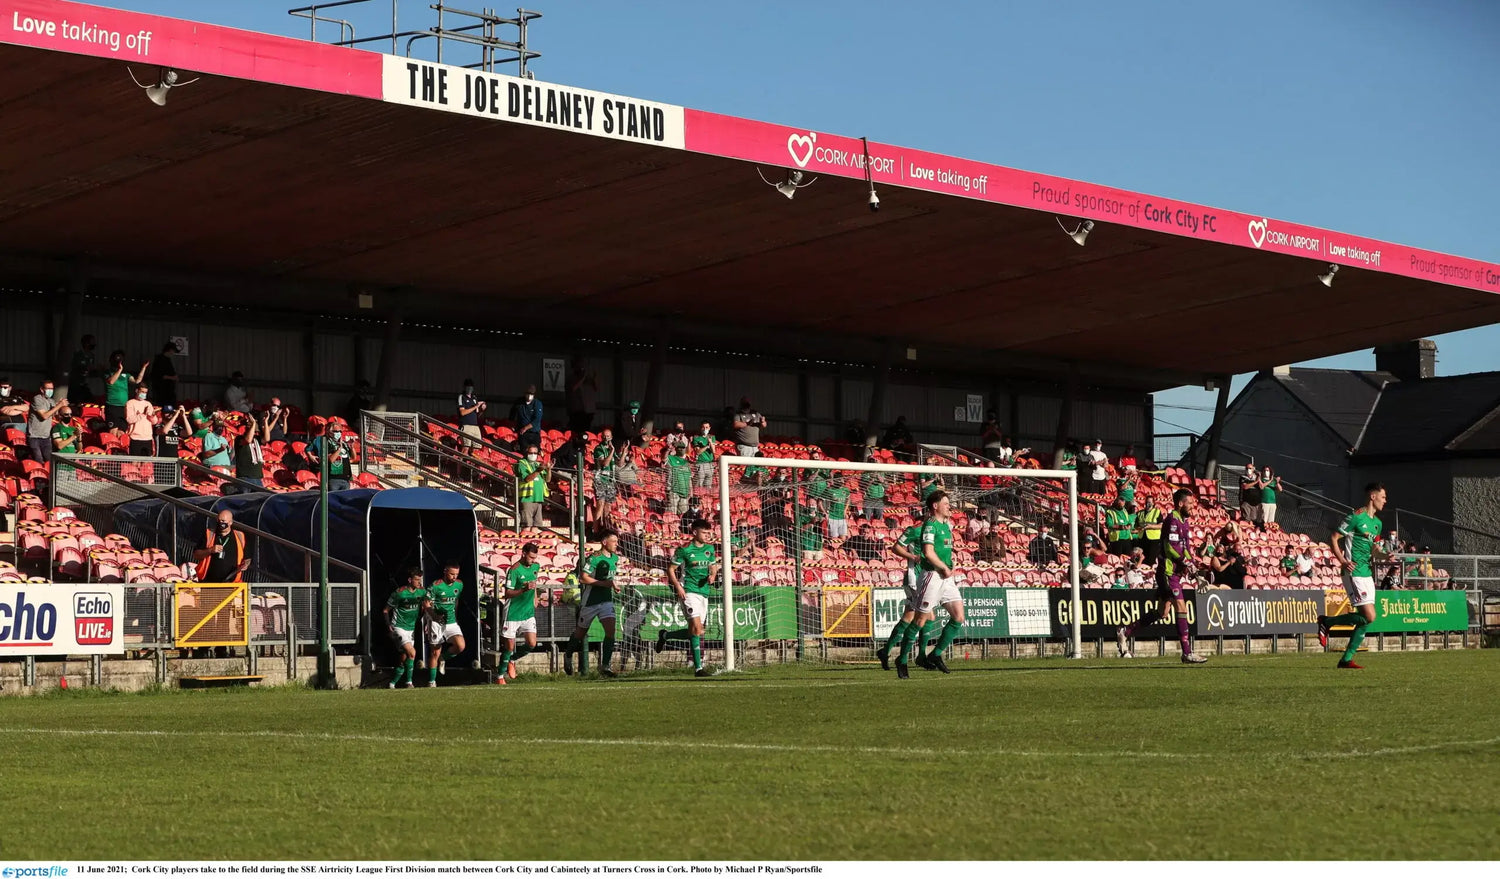 Tickets for Bray Wanderers match on general sale now!